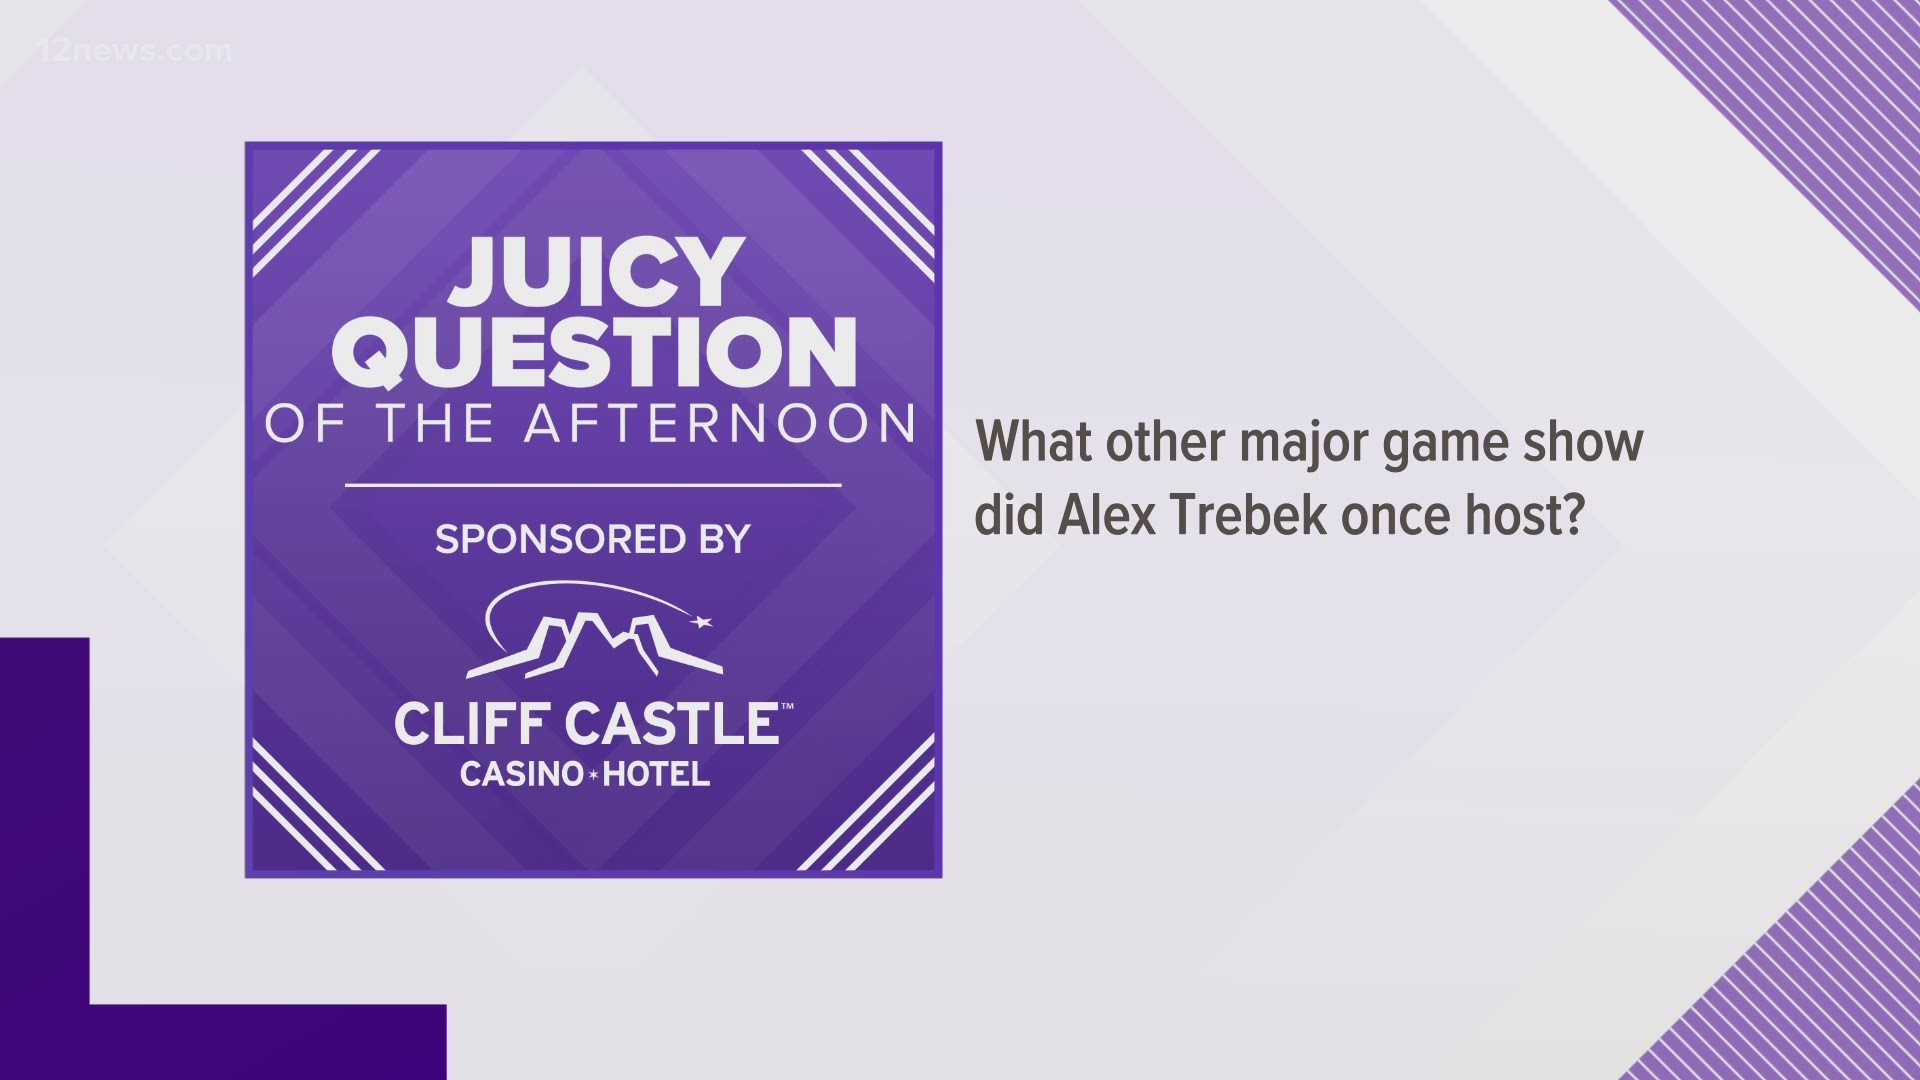 Juicy Question: What major game show did Alex Trebek host, aside from 'Jeopardy'?